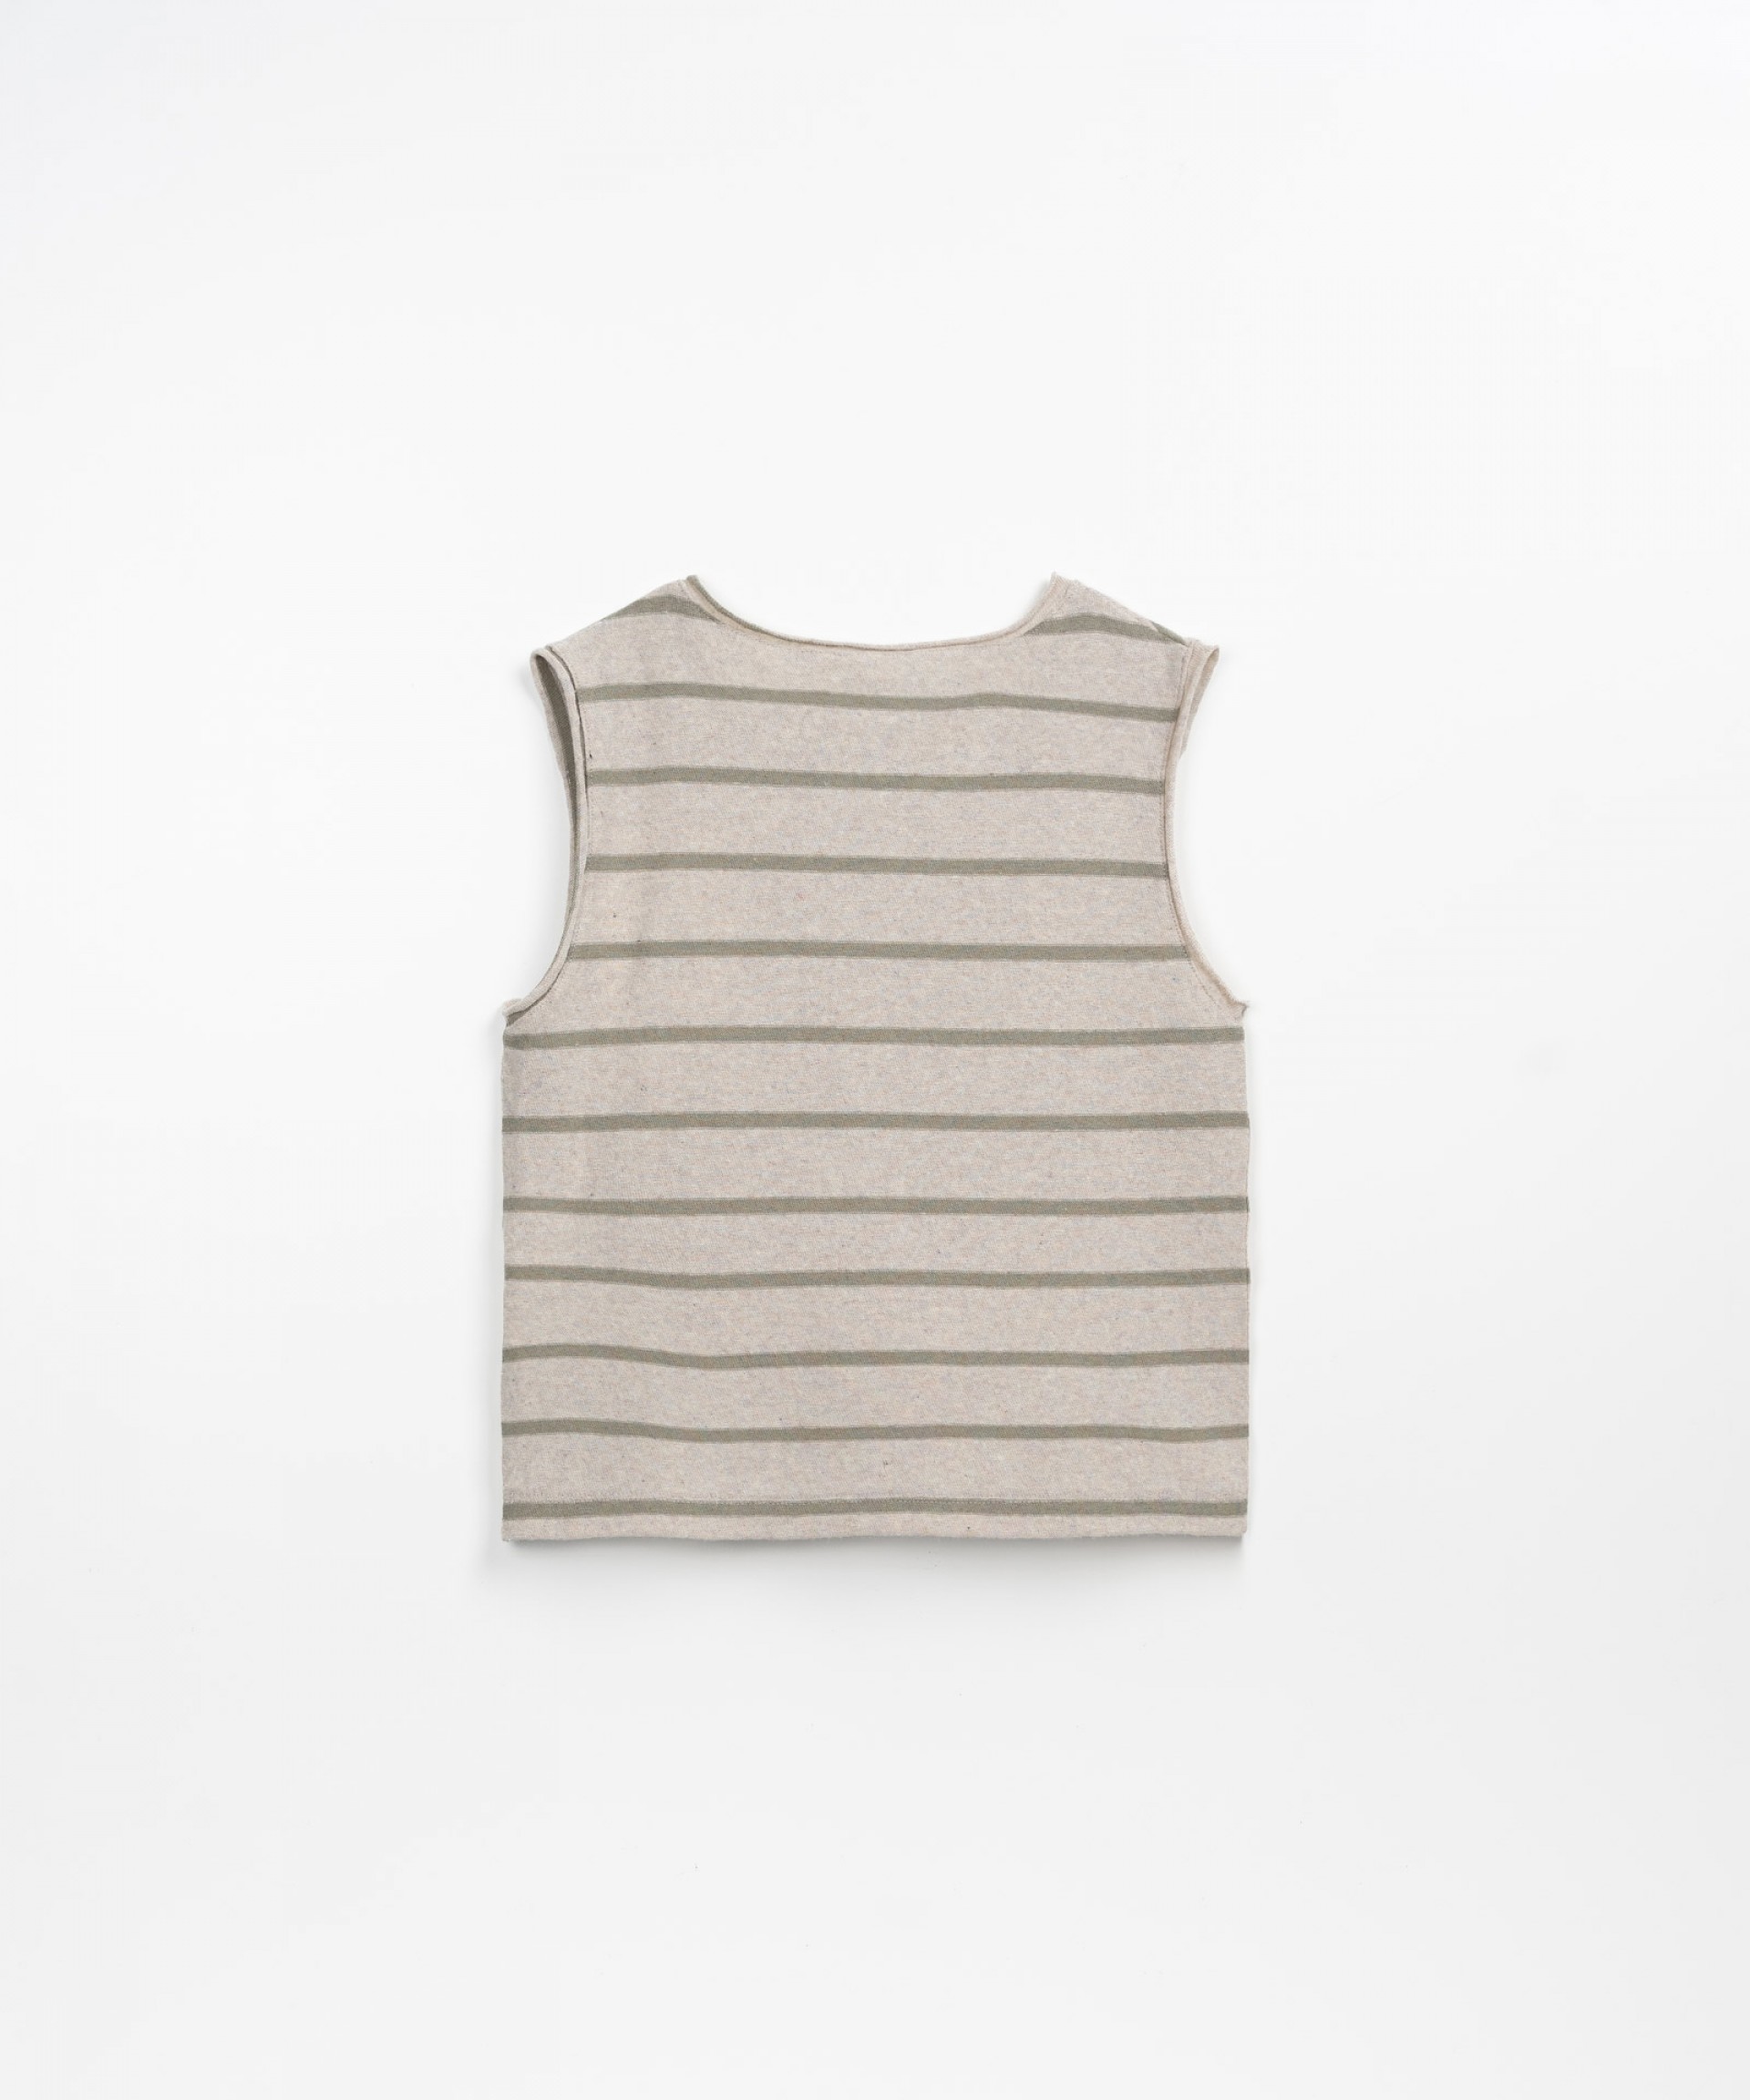 Sleeveless T-shirt with front opening | Textile Art